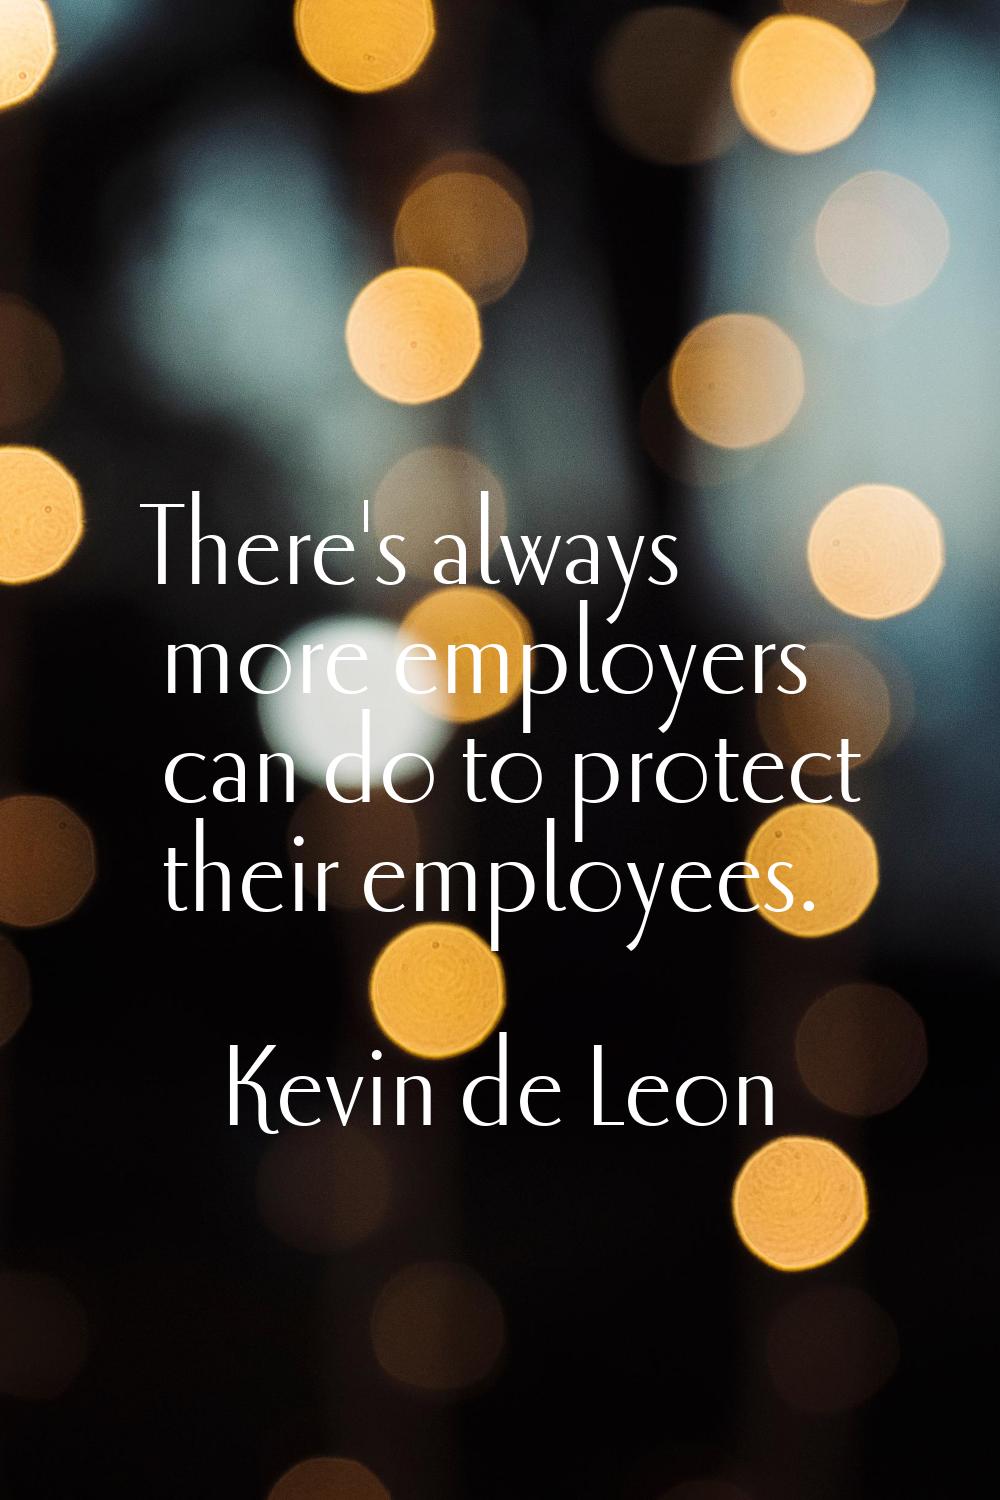 There's always more employers can do to protect their employees.